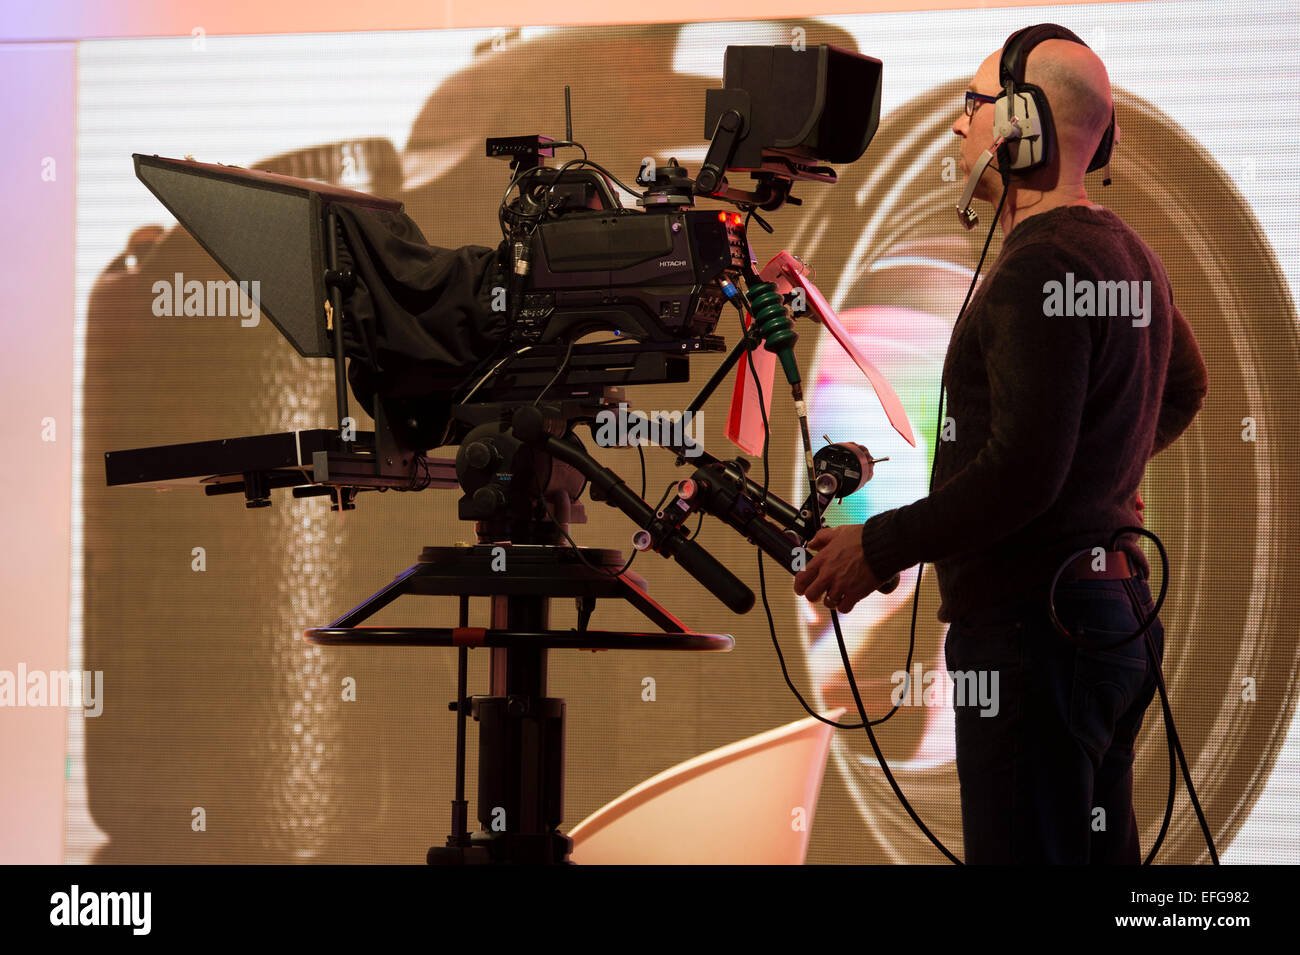 Working In The Broadcast Media: A Cameraman Camera Operator Working An A  Live Afternoon Welsh Language